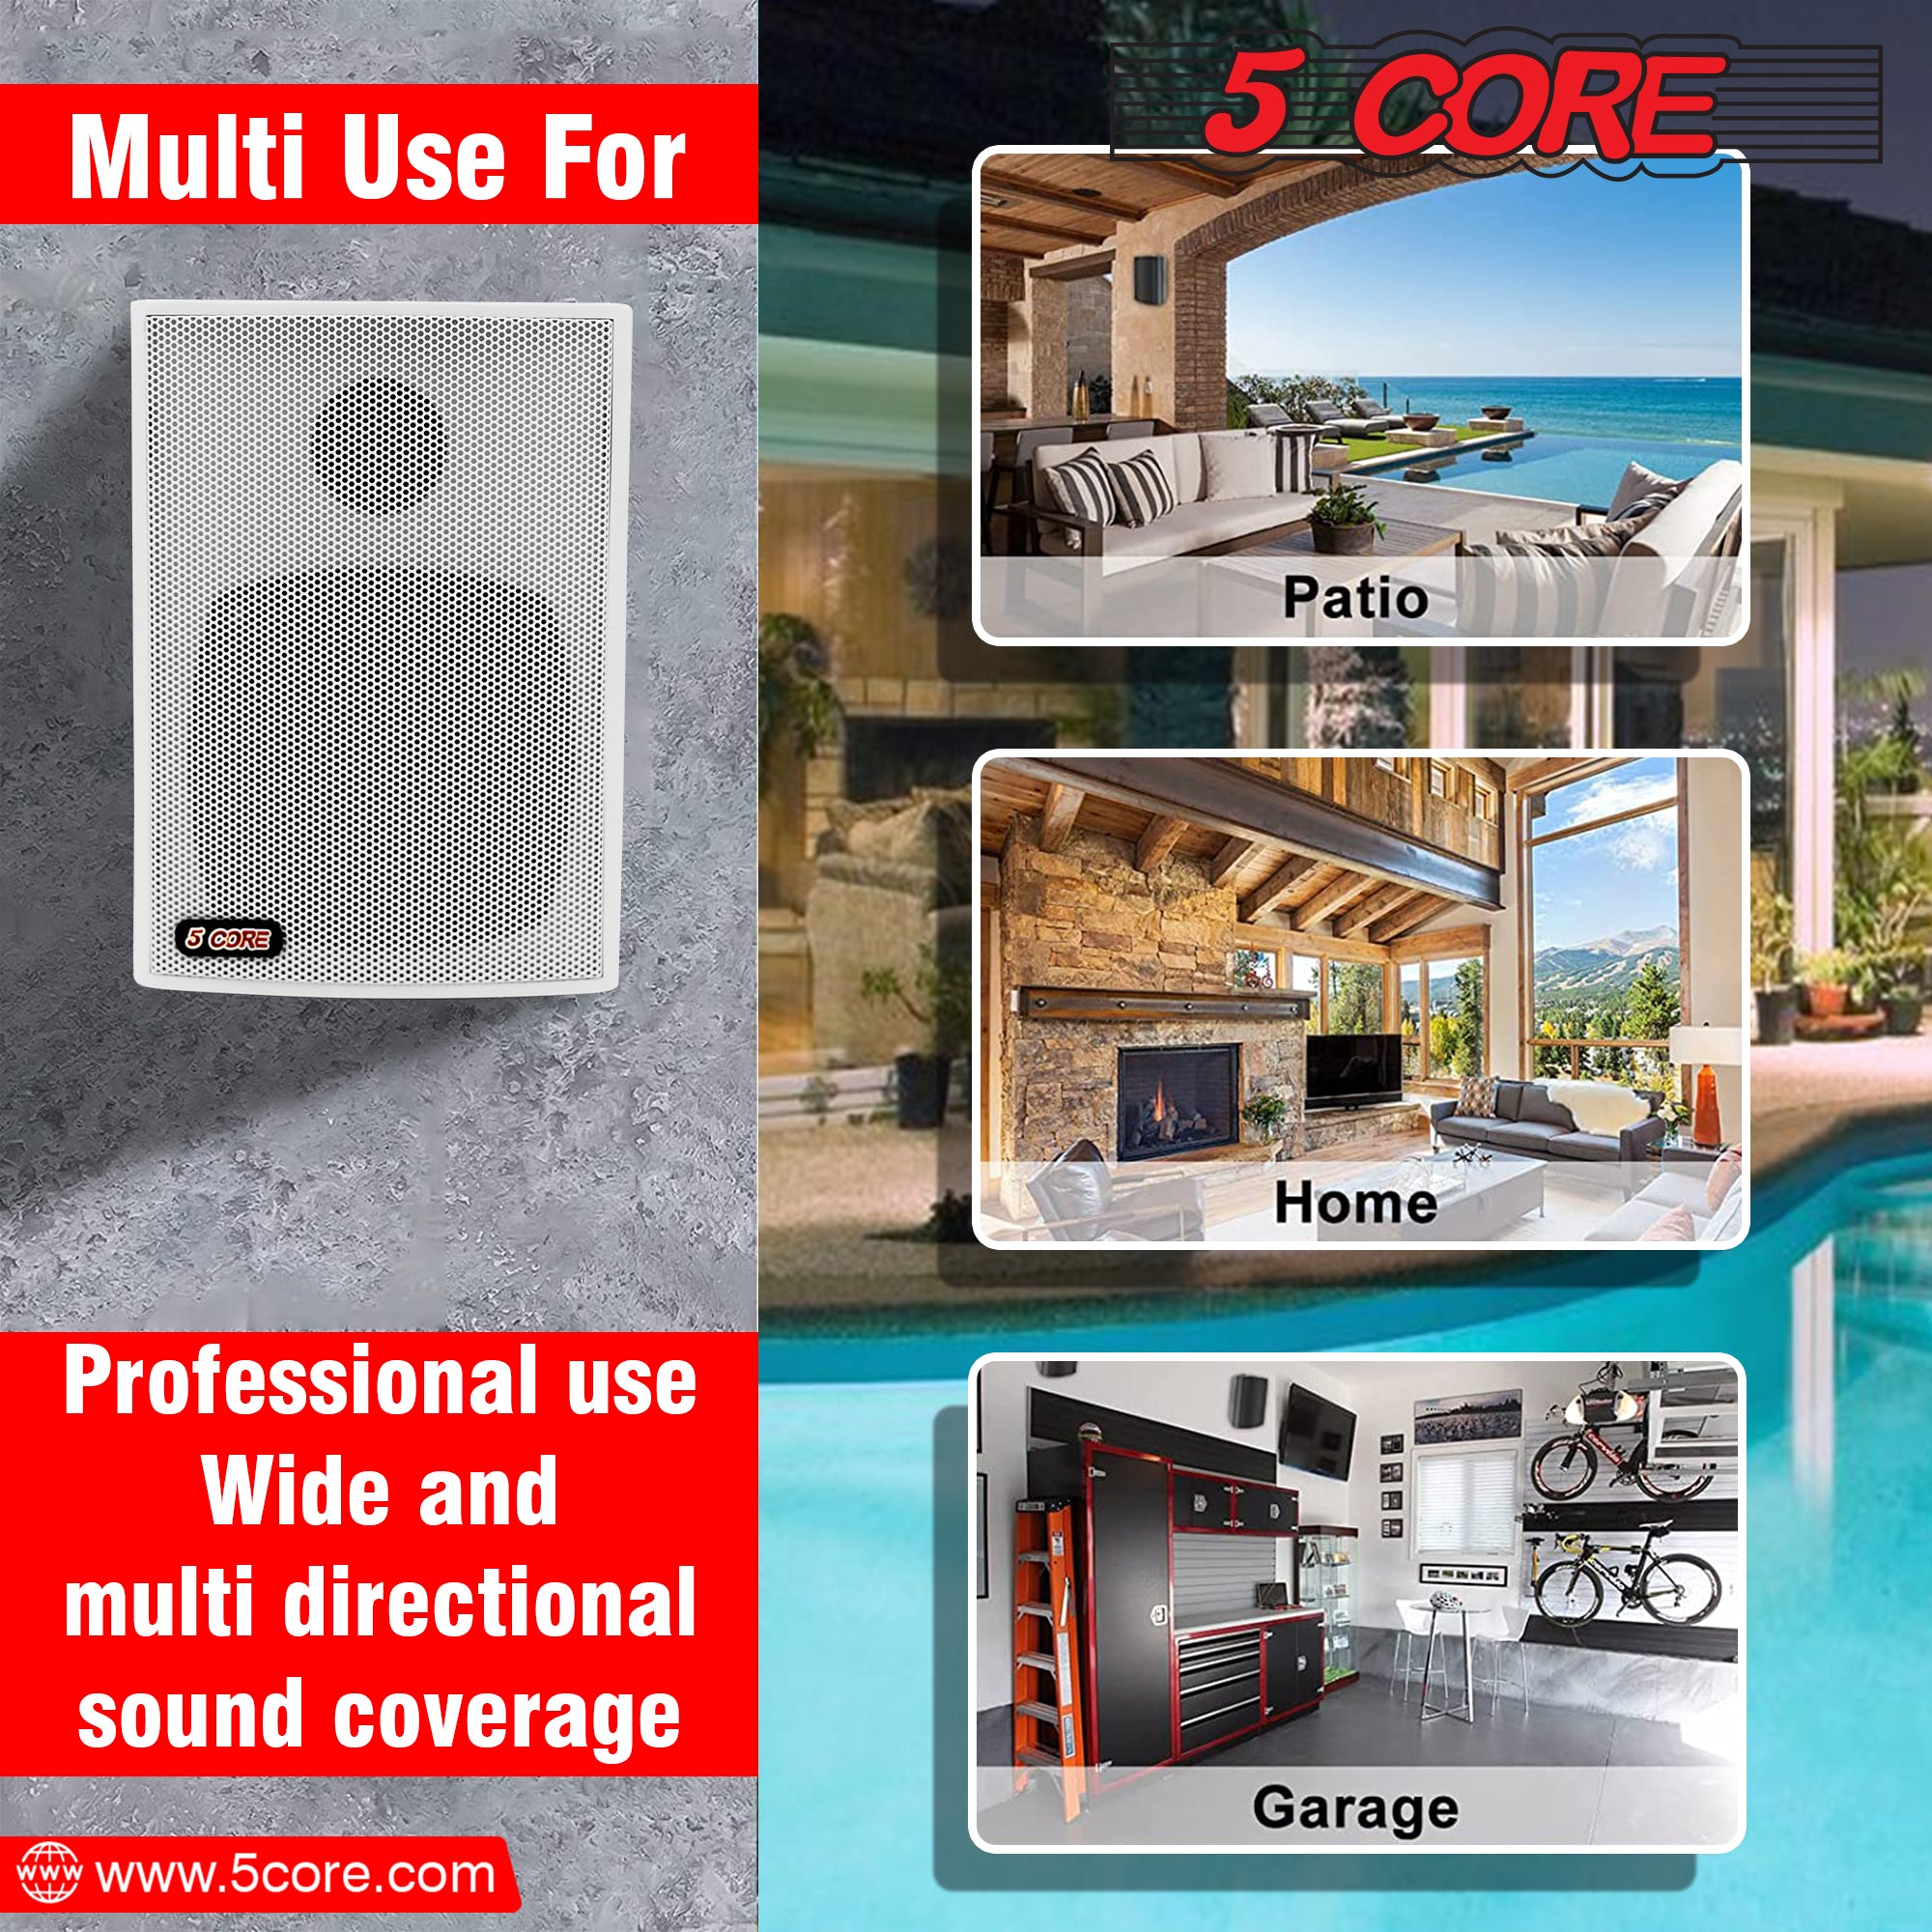 5 Core Wall Mount Speakers Outdoor 20W 1 Piece Stereo Wired Speaker White For Studio Patio Pool Home Office Commercial Places - 13T WH 1PK